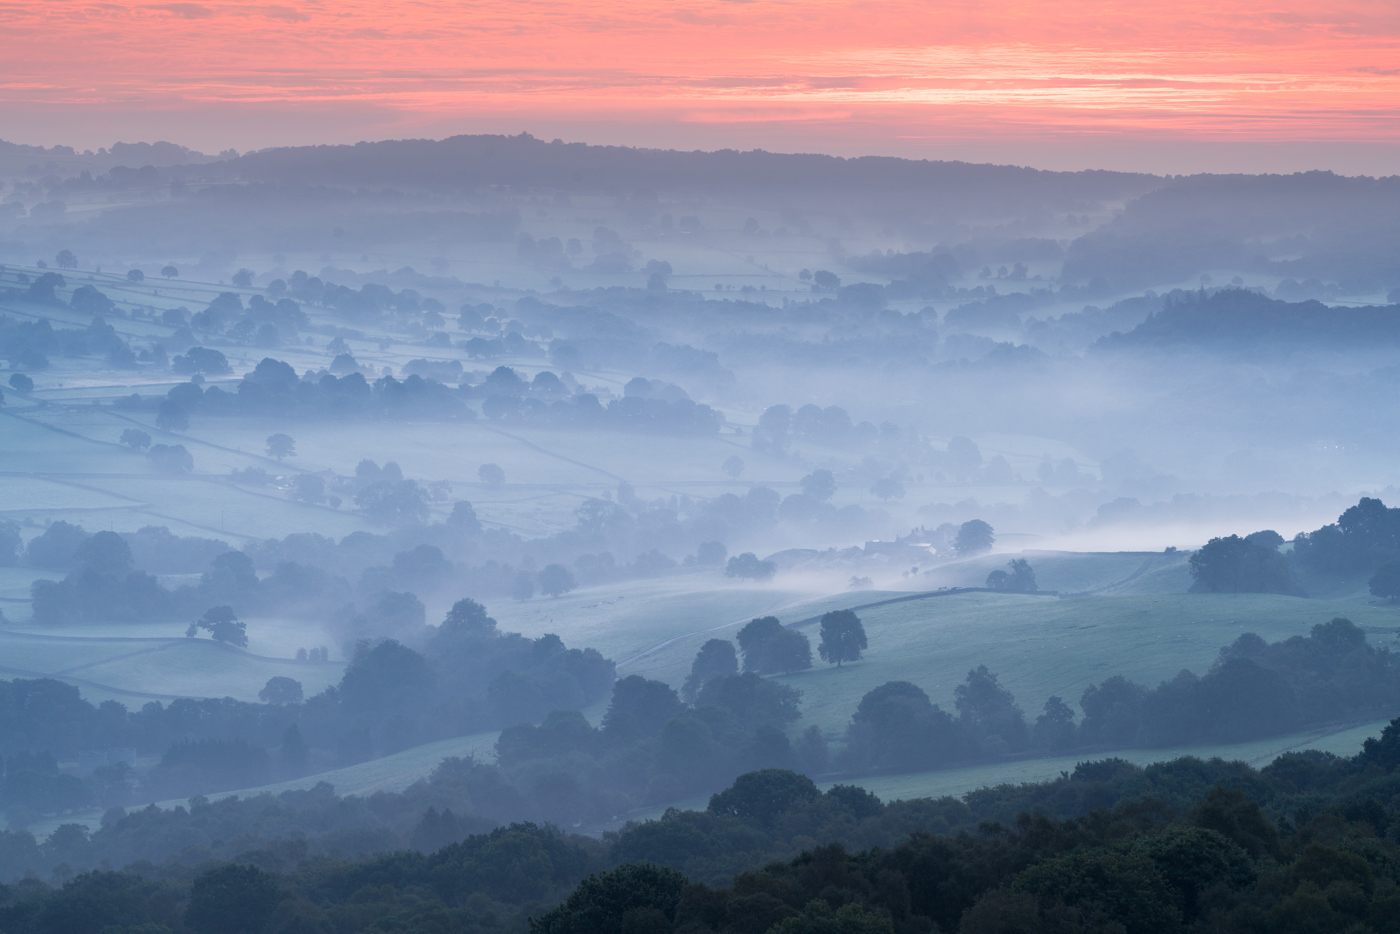 A dawn sky with gradients from deep blue to warm pink overlooks mist-veiled, undulating countryside with trees and hedgerows defining patchwork fields. a foggy valley with trees